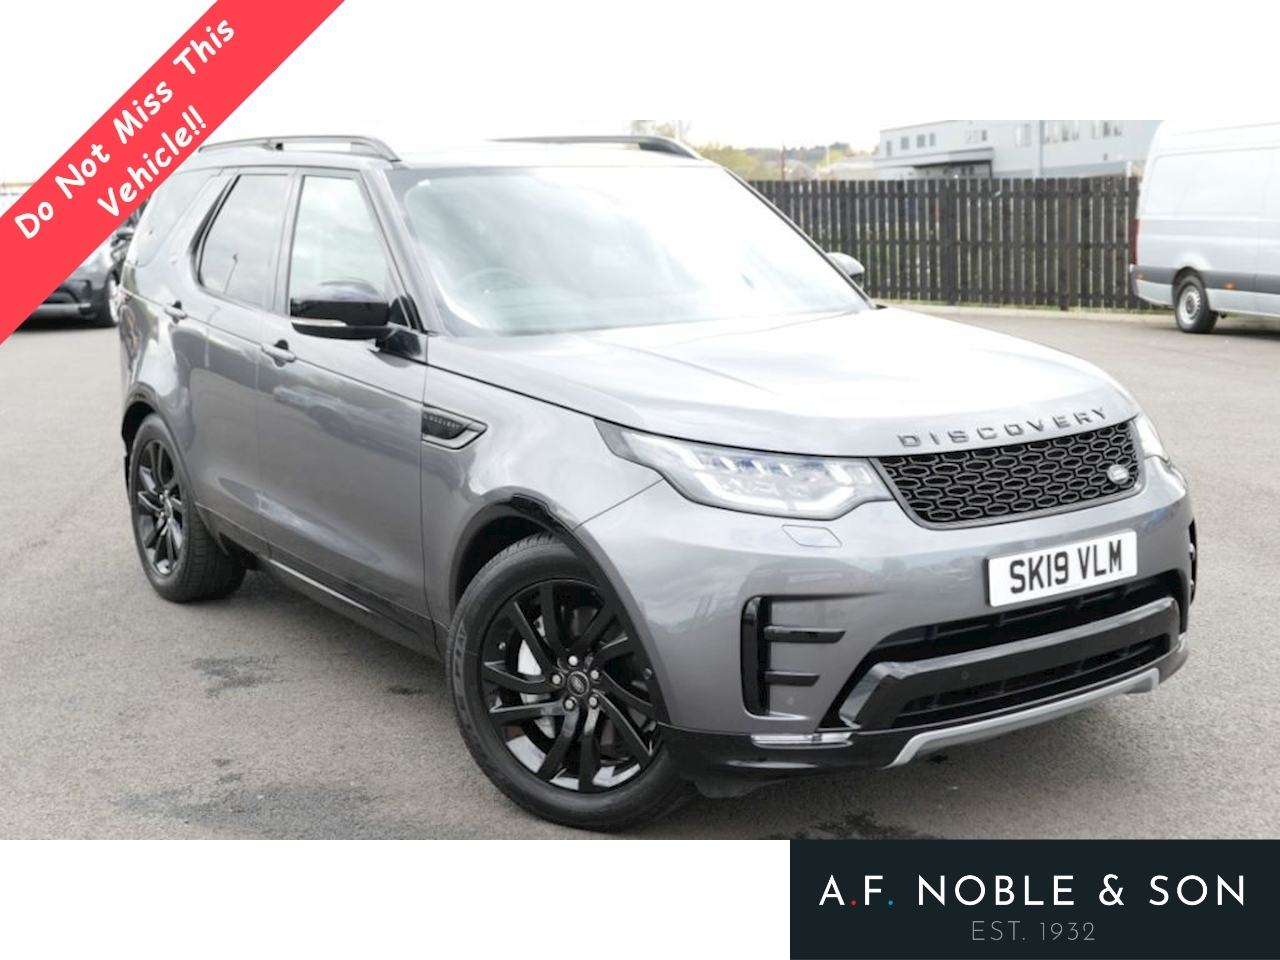 Discovery 3.0 SDV6 HSE Luxury 5dr Auto